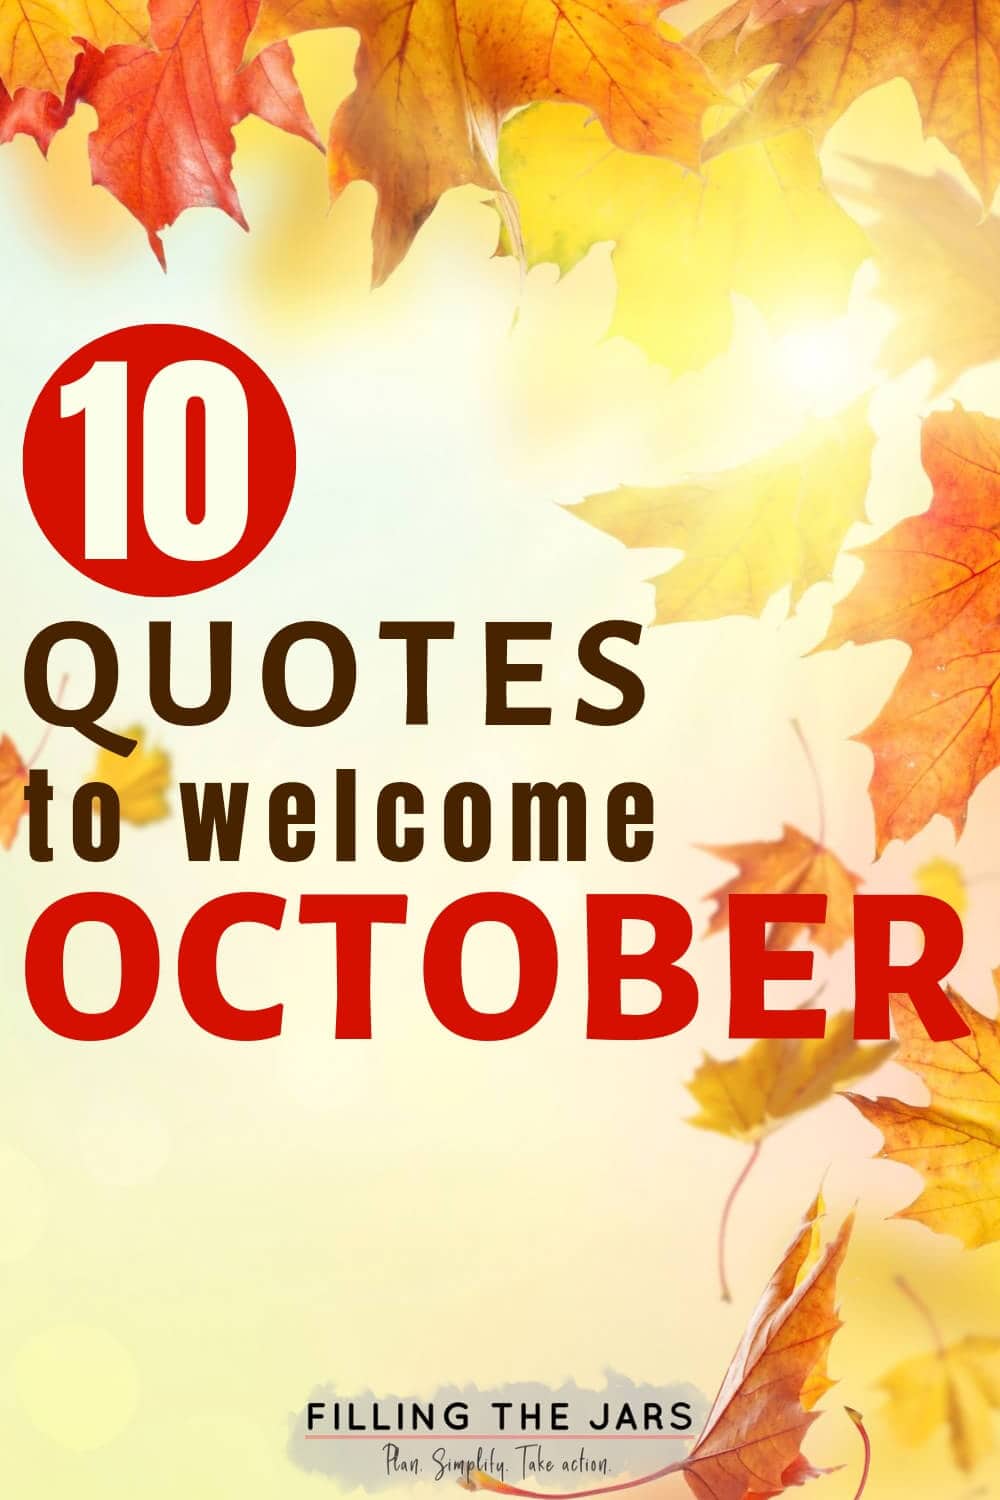 leaf graphics with overlay title of 10 quotes to welcome october